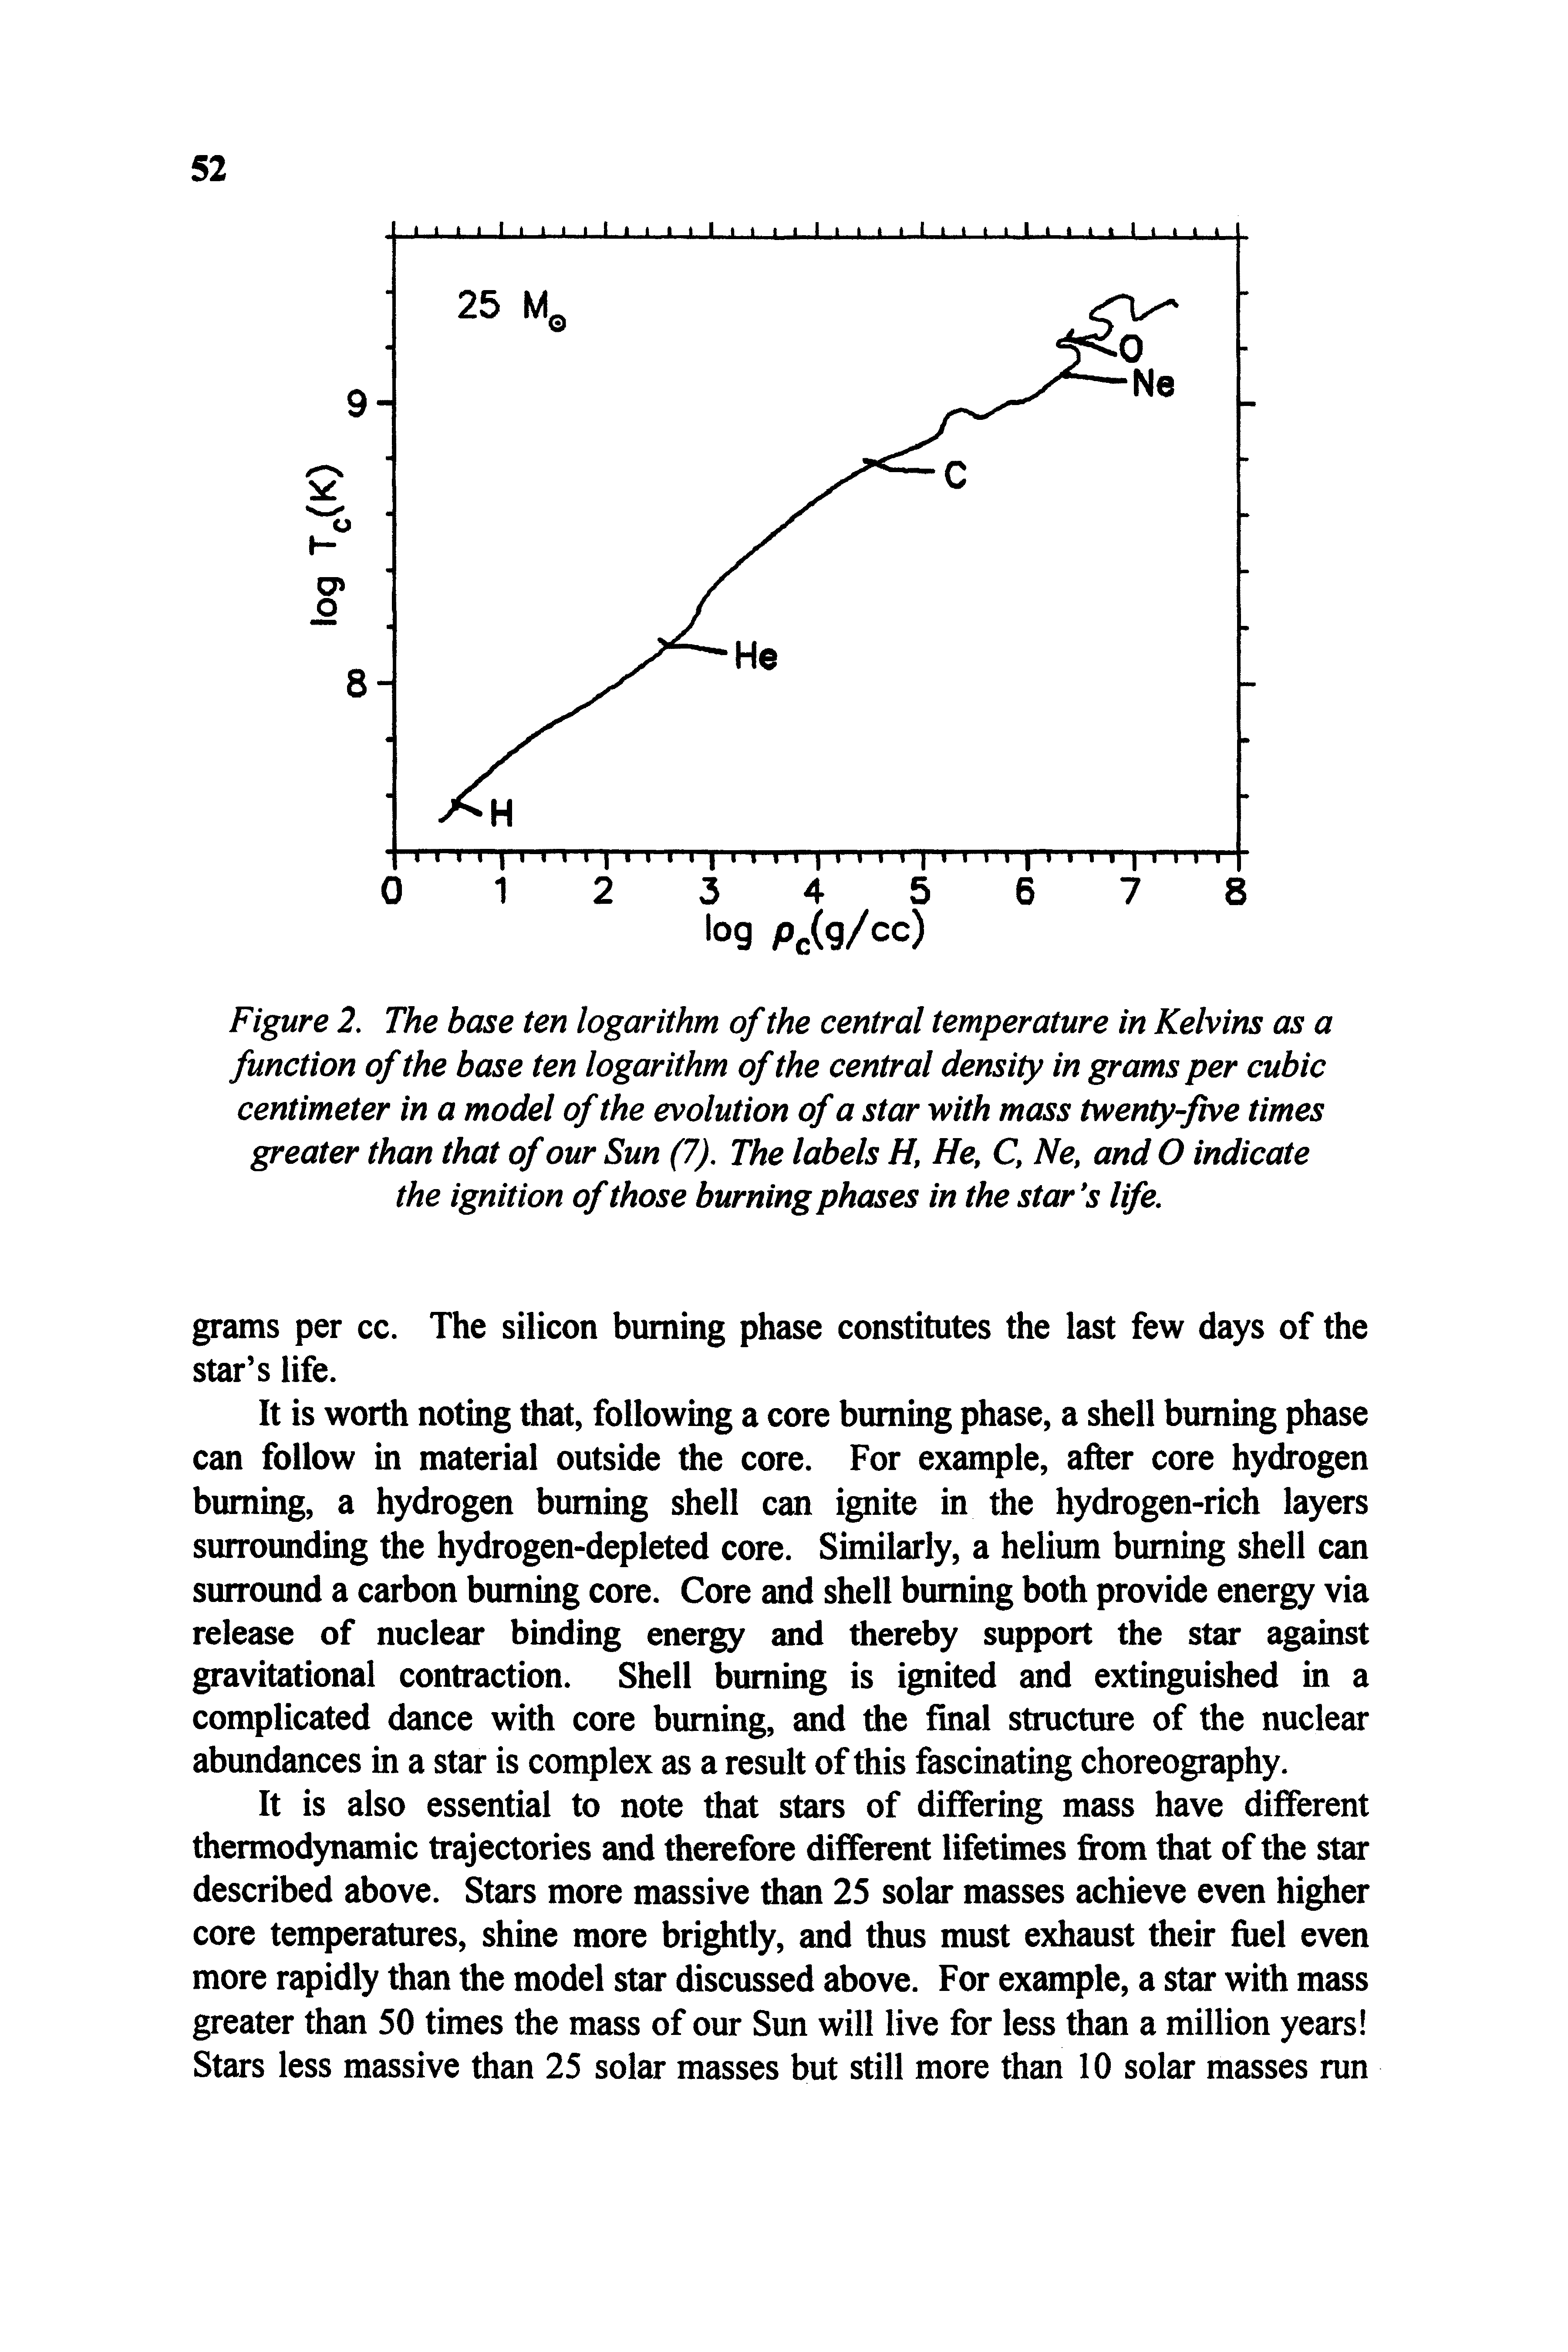 Figure 2. The base ten logarithm of the central temperature in Kelvins as a function of the base ten logarithm of the central density in grams per cubic centimeter in a model of the evolution of a star with mass twenty-five times greater than that of our Sun (7). The labels H, He, C, Ne, and O indicate the ignition of those burning phases in the star s life.